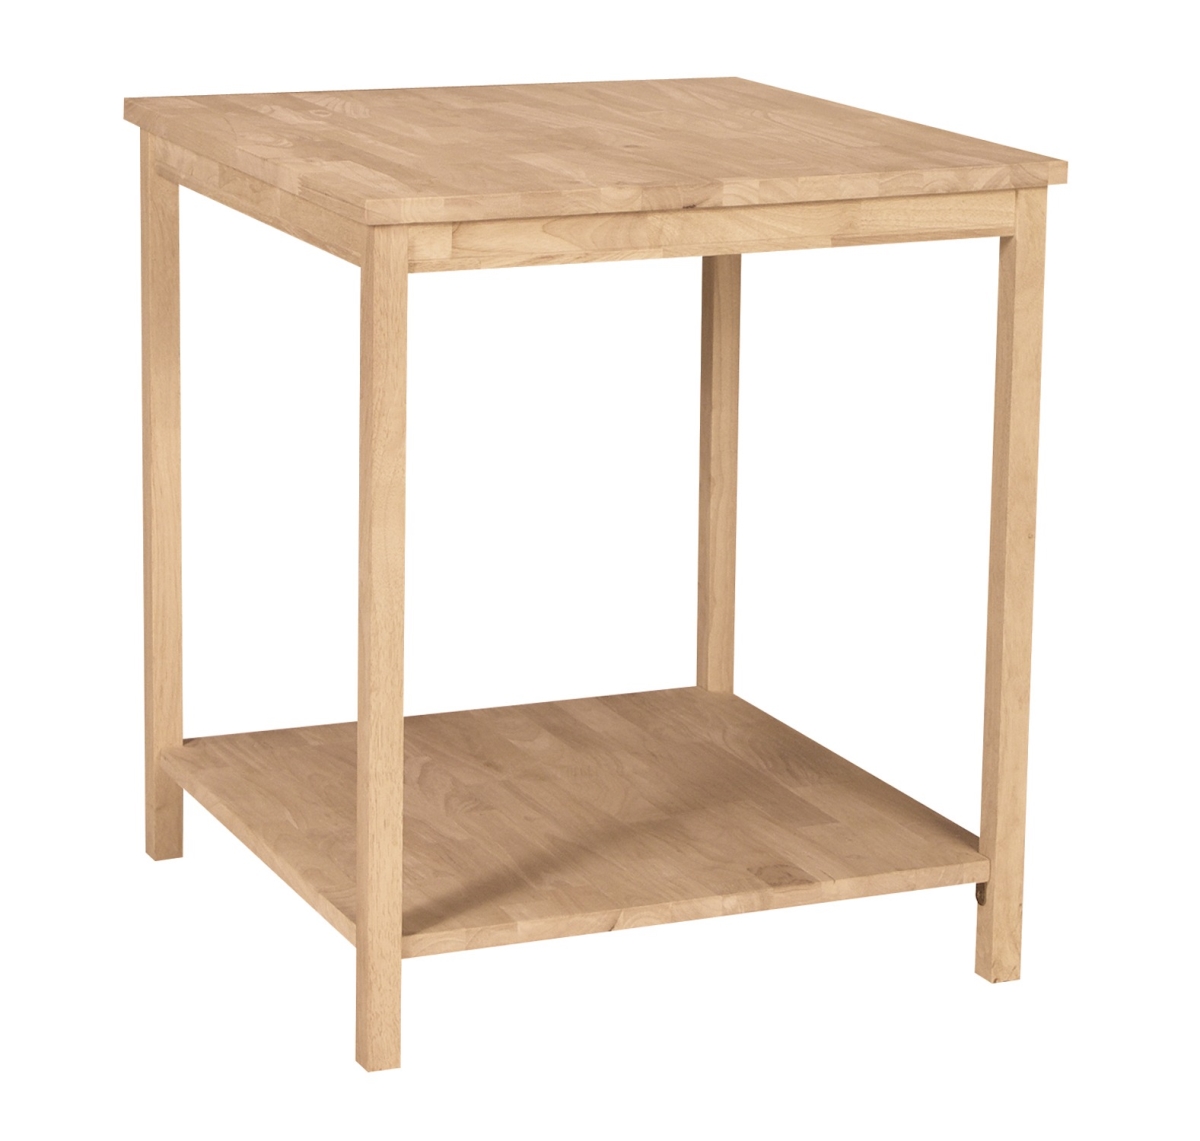 Of-63 30 X 26 X 26 In. Table For Connecting Desks